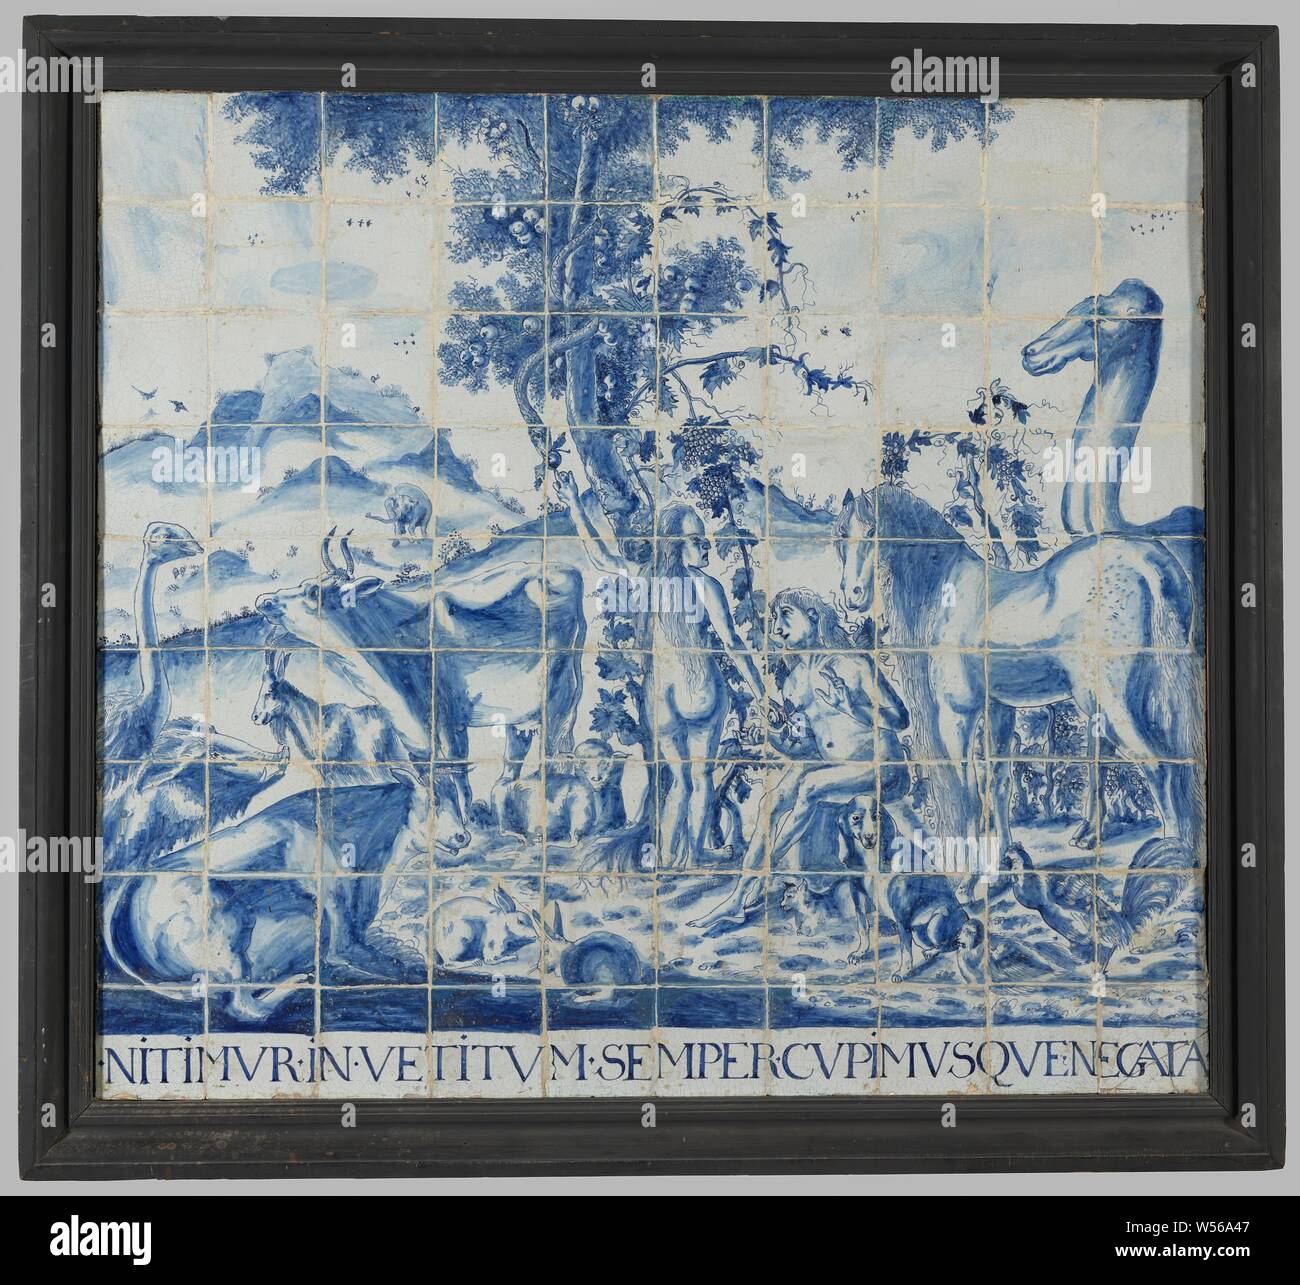 Tile panel of 90 tiles, Tile panel of 90 tiles (9 x 10) with a blue-painted biblical representation of Adam and Eve surrounded by animals with the tree with the snake in the middle. Below the show, the inscription: .NITIMVR.IN.VETITVM.SEMPER.CVPIMVSQVENEGATA., anonymous, Netherlands, 1650 - 1680, earthenware, tin glaze, h 131 cm × w 144.5 cm × d 7 Stock Photo